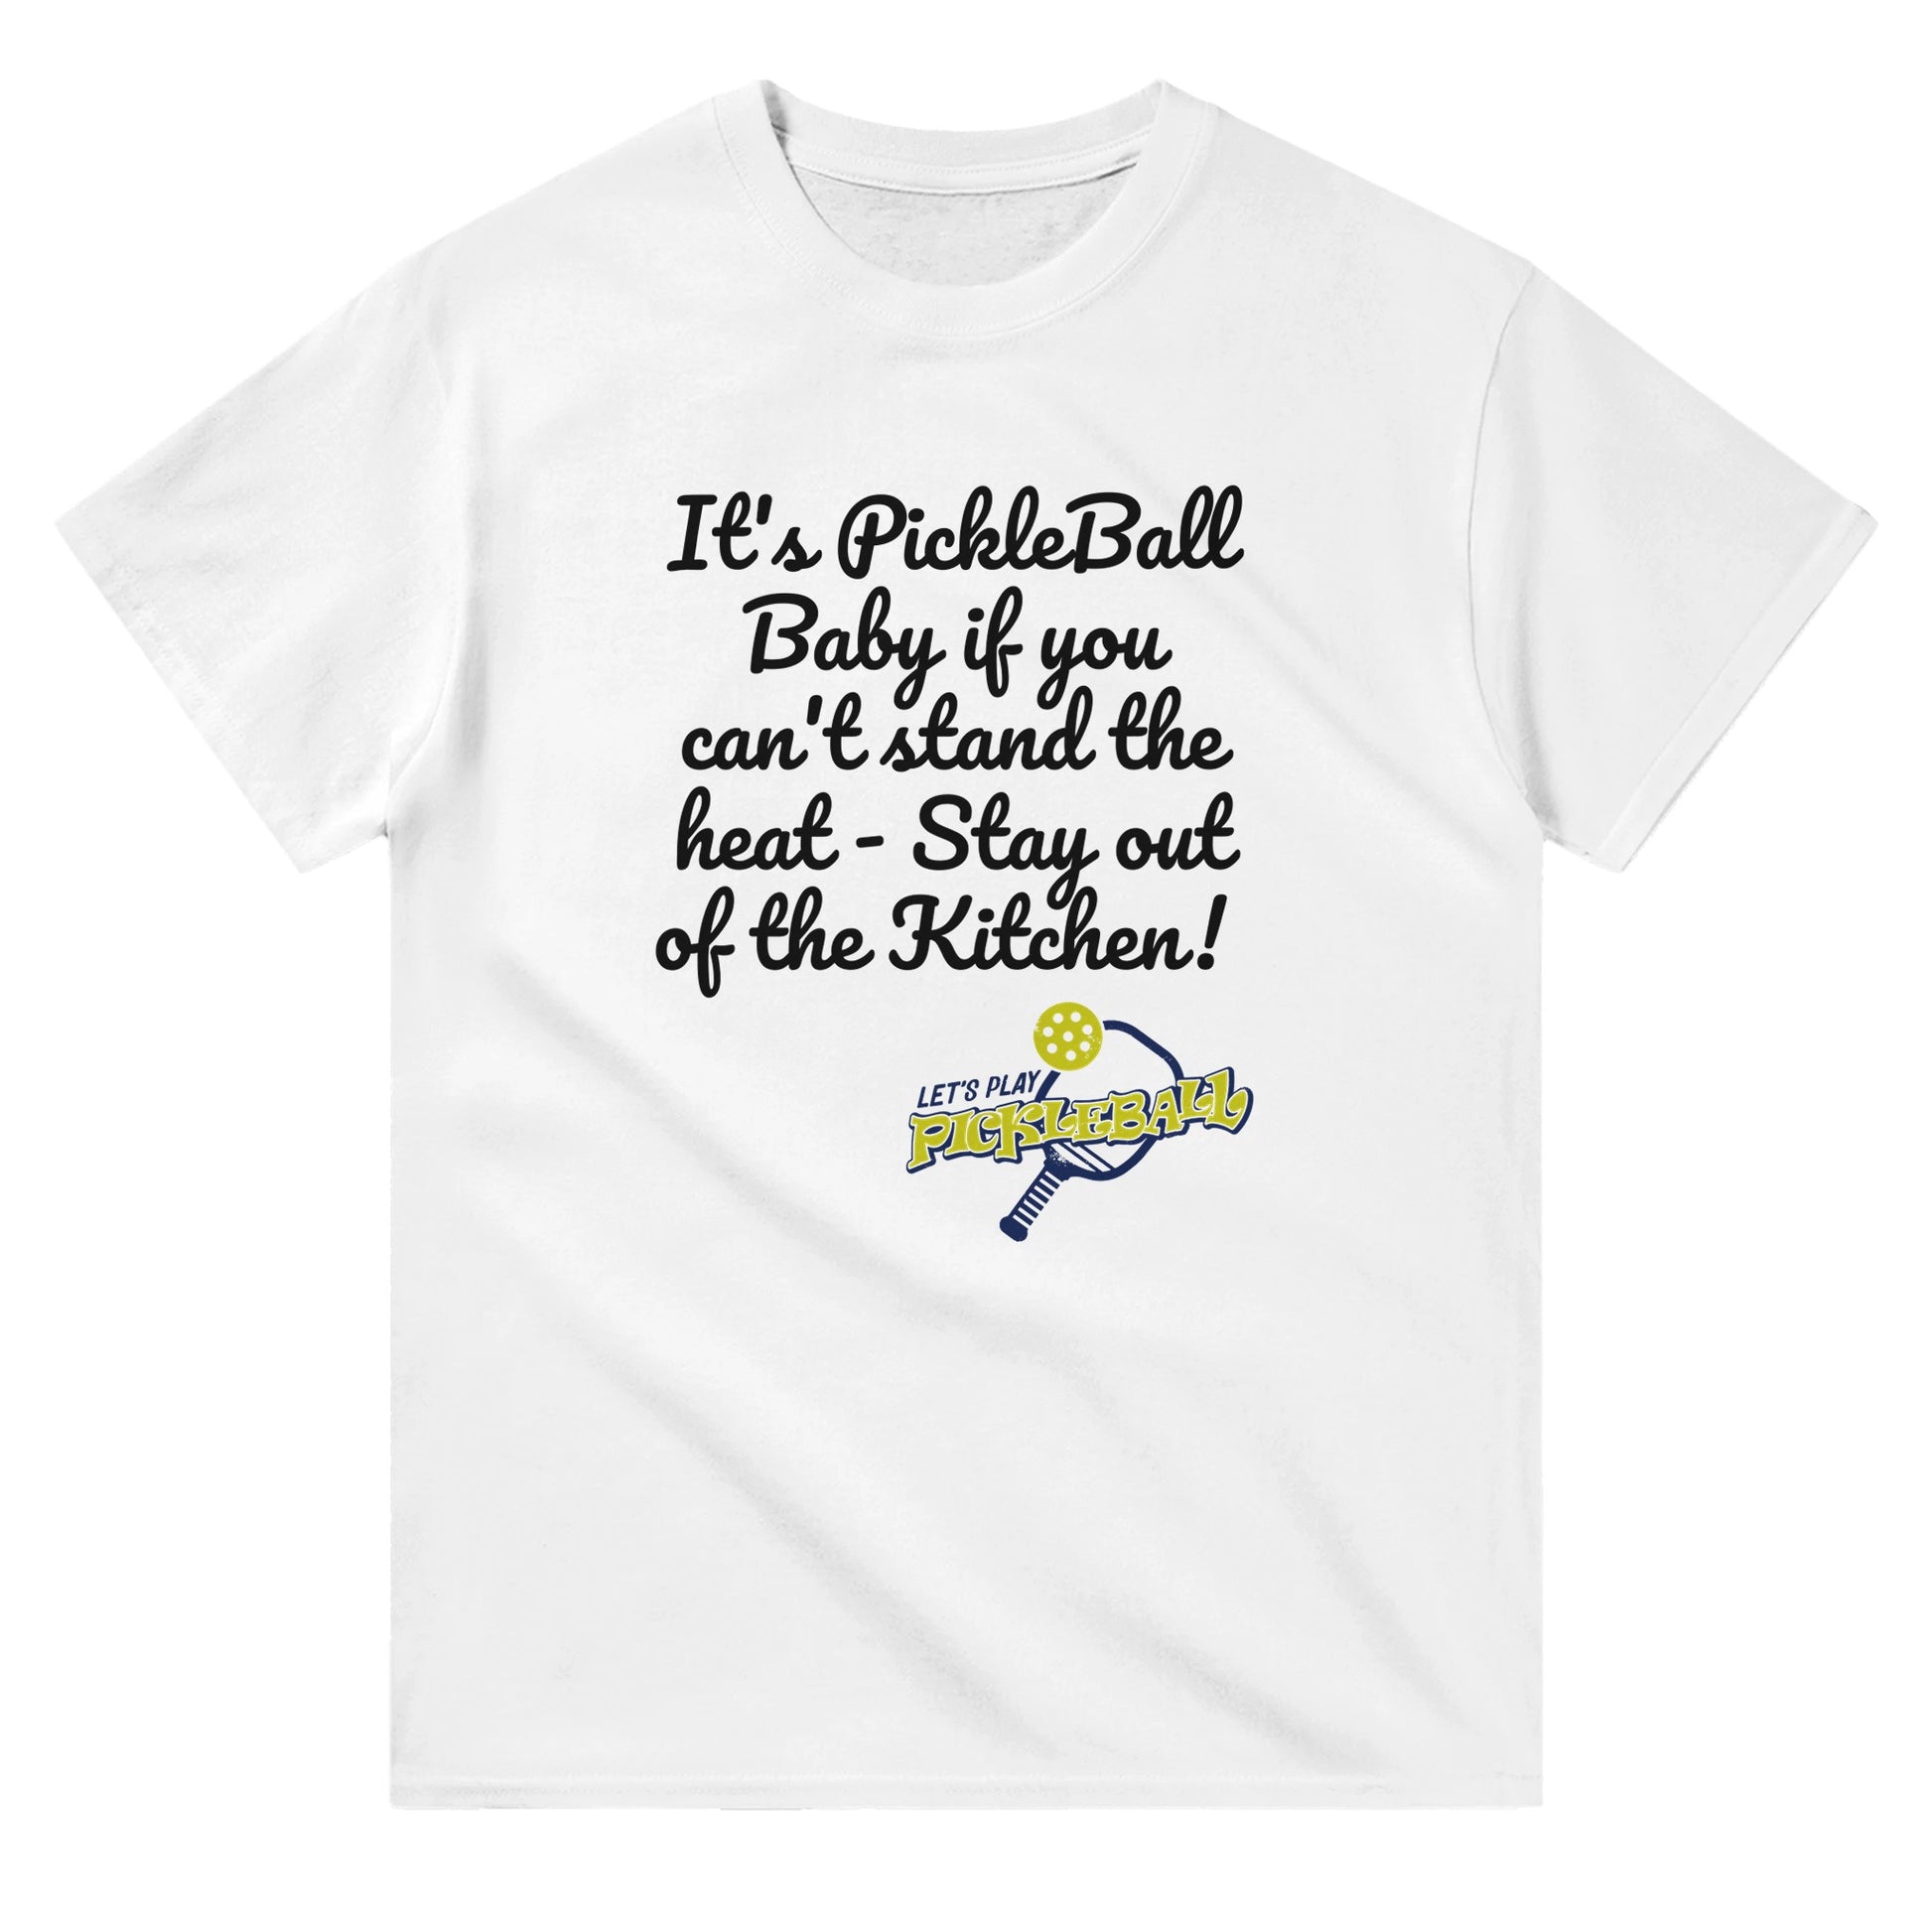 A white comfortable Unisex Crewneck heavyweight cotton t-shirt with funny saying It’s PickleBall Baby if can’t stand the heat – Stay out of the Kitchen!  and Let’s Play Pickleball logo on the front from WhatYa Say Apparel lying flat.